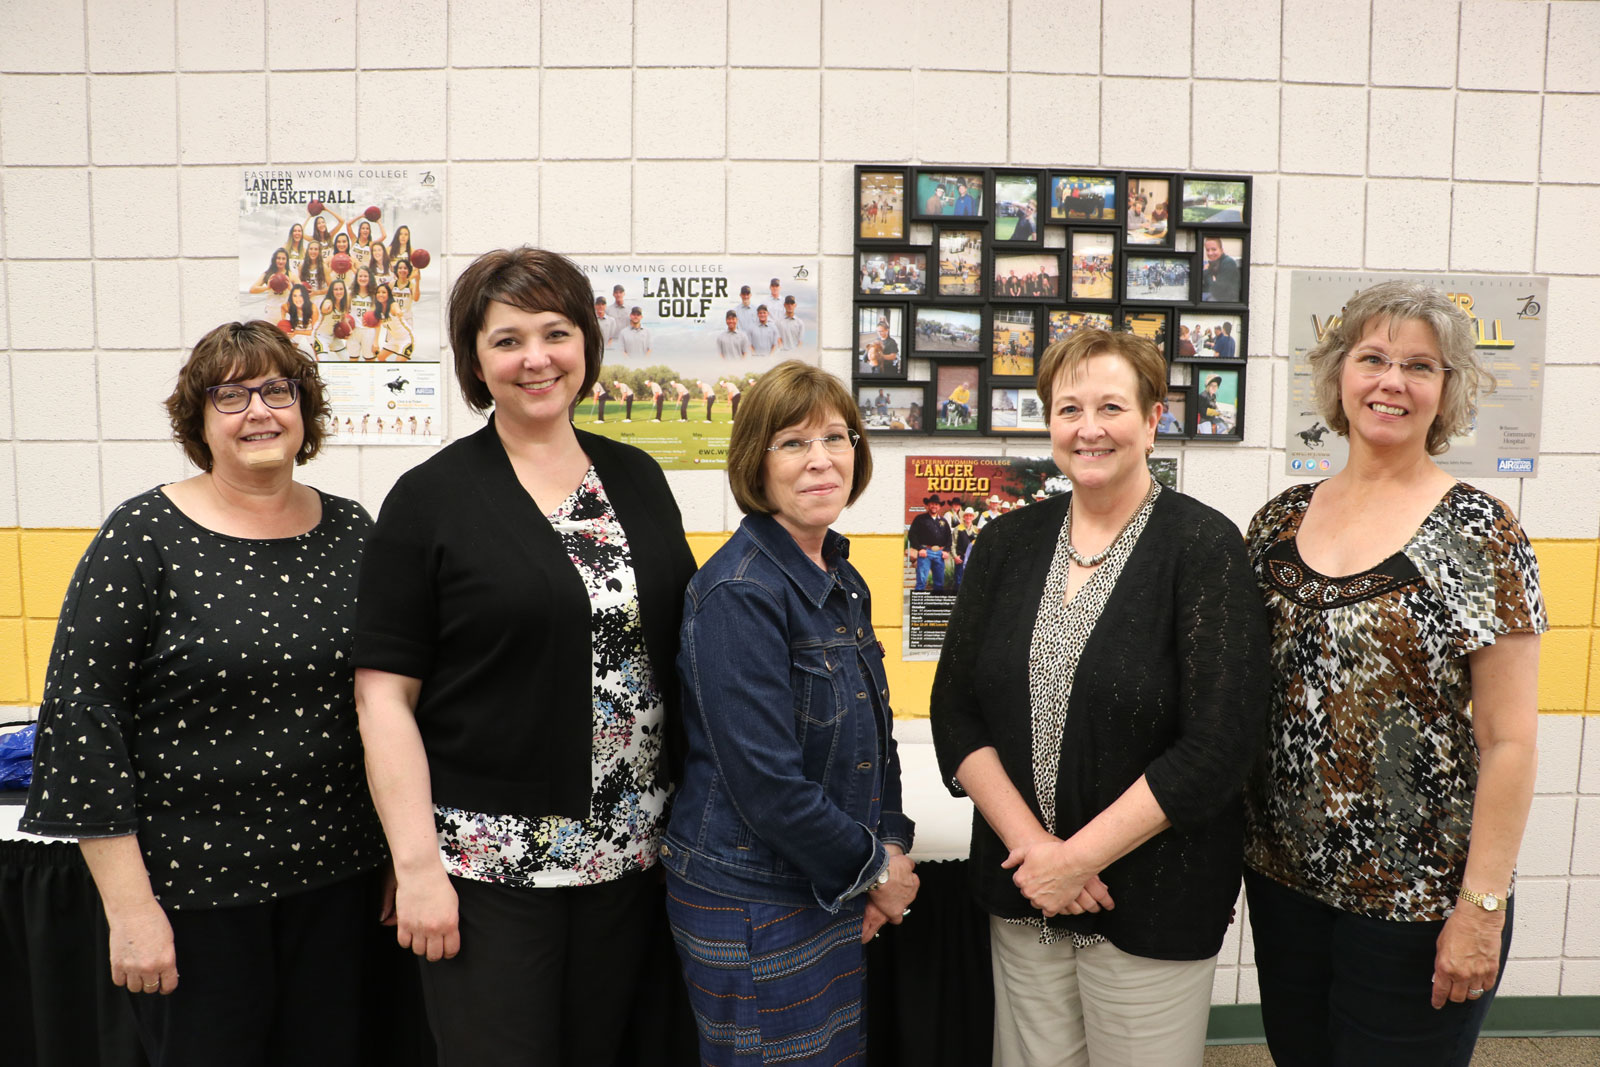 Employees recognized at EWC (L to R): Holly West, Amy Smith, Holly Lara, Holly Branham, Laurie Mueller. Not pictured, Zach Smith and Tyler Vasko.